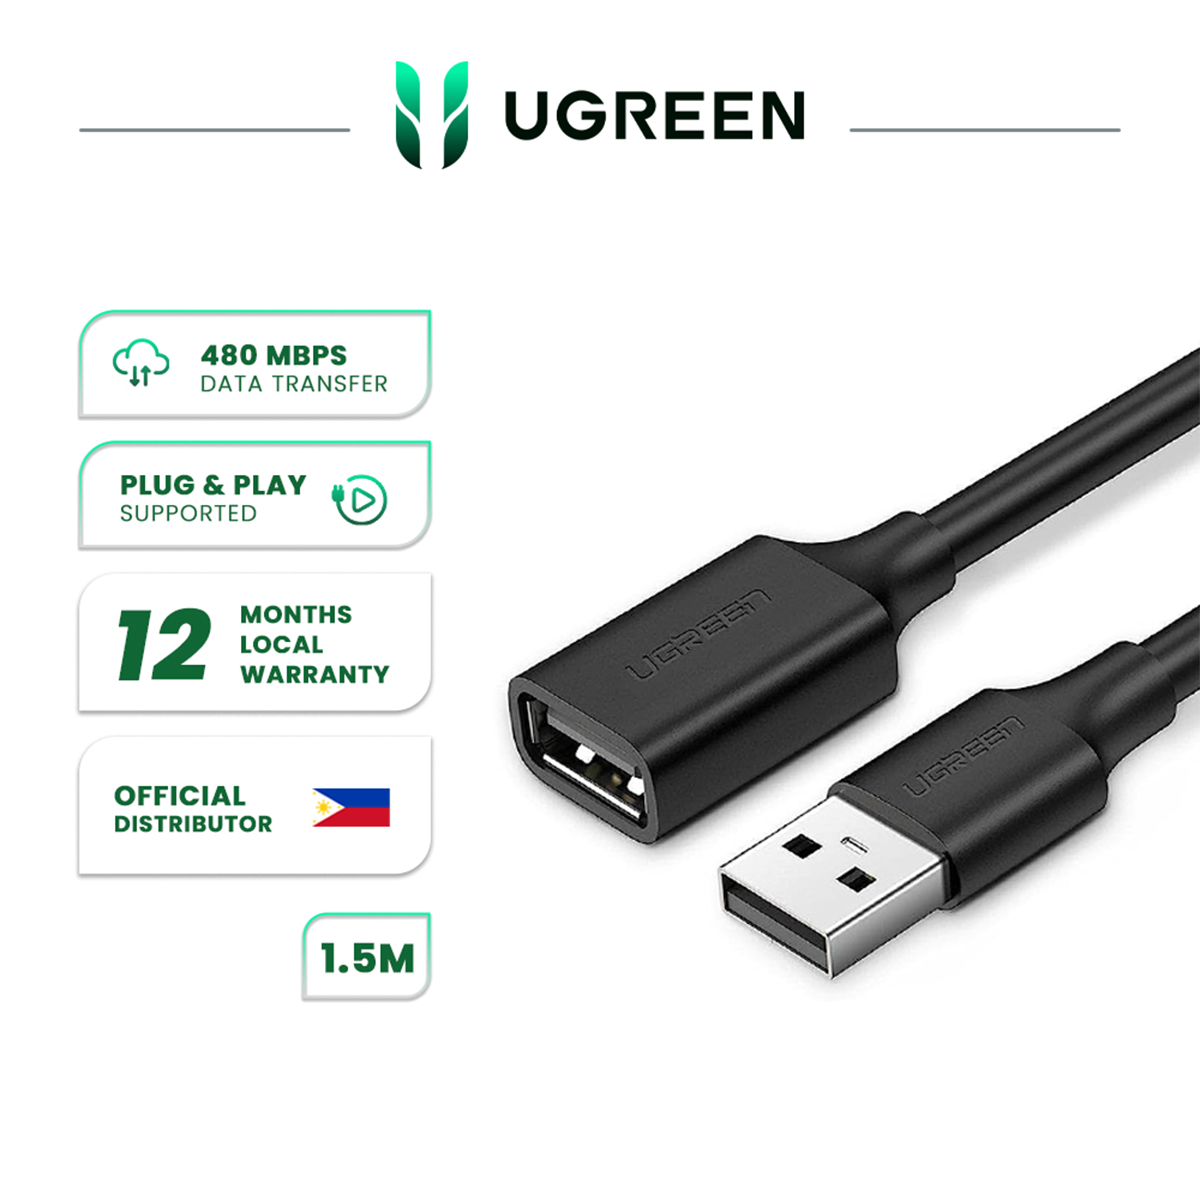 UGREEN USB 3.0 Extension Cable (A Male to A Female) for USB Hub, Printer, Card Reader, Bluetooth Adapter, Flash Drive, Oculus Rift Headset, Hard Mouse, Keyboard - PH | PH